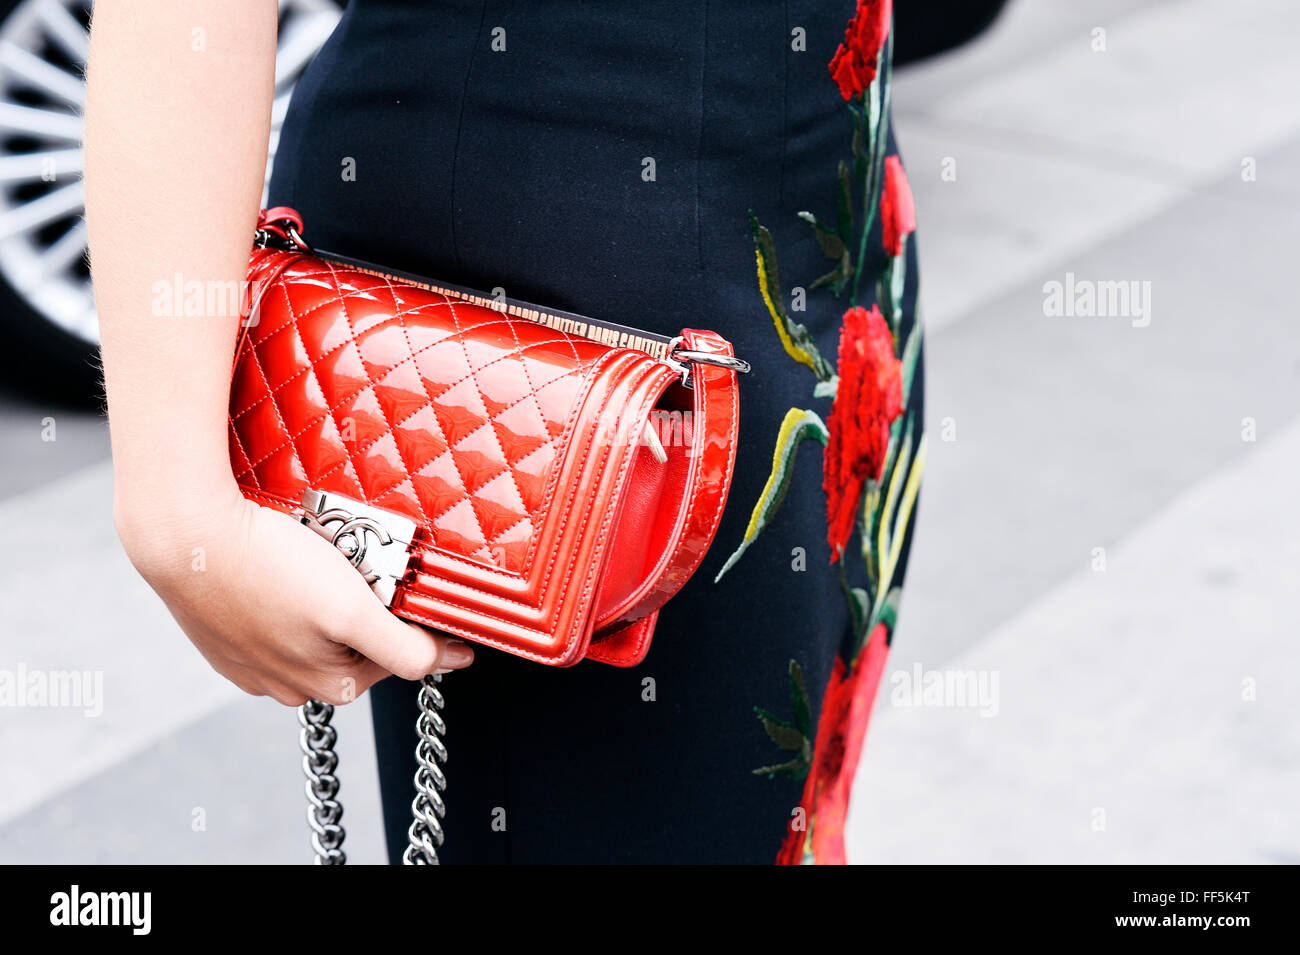 Chanel Bag - Paris Fashion Week clutches and bags Stock Photo - Alamy